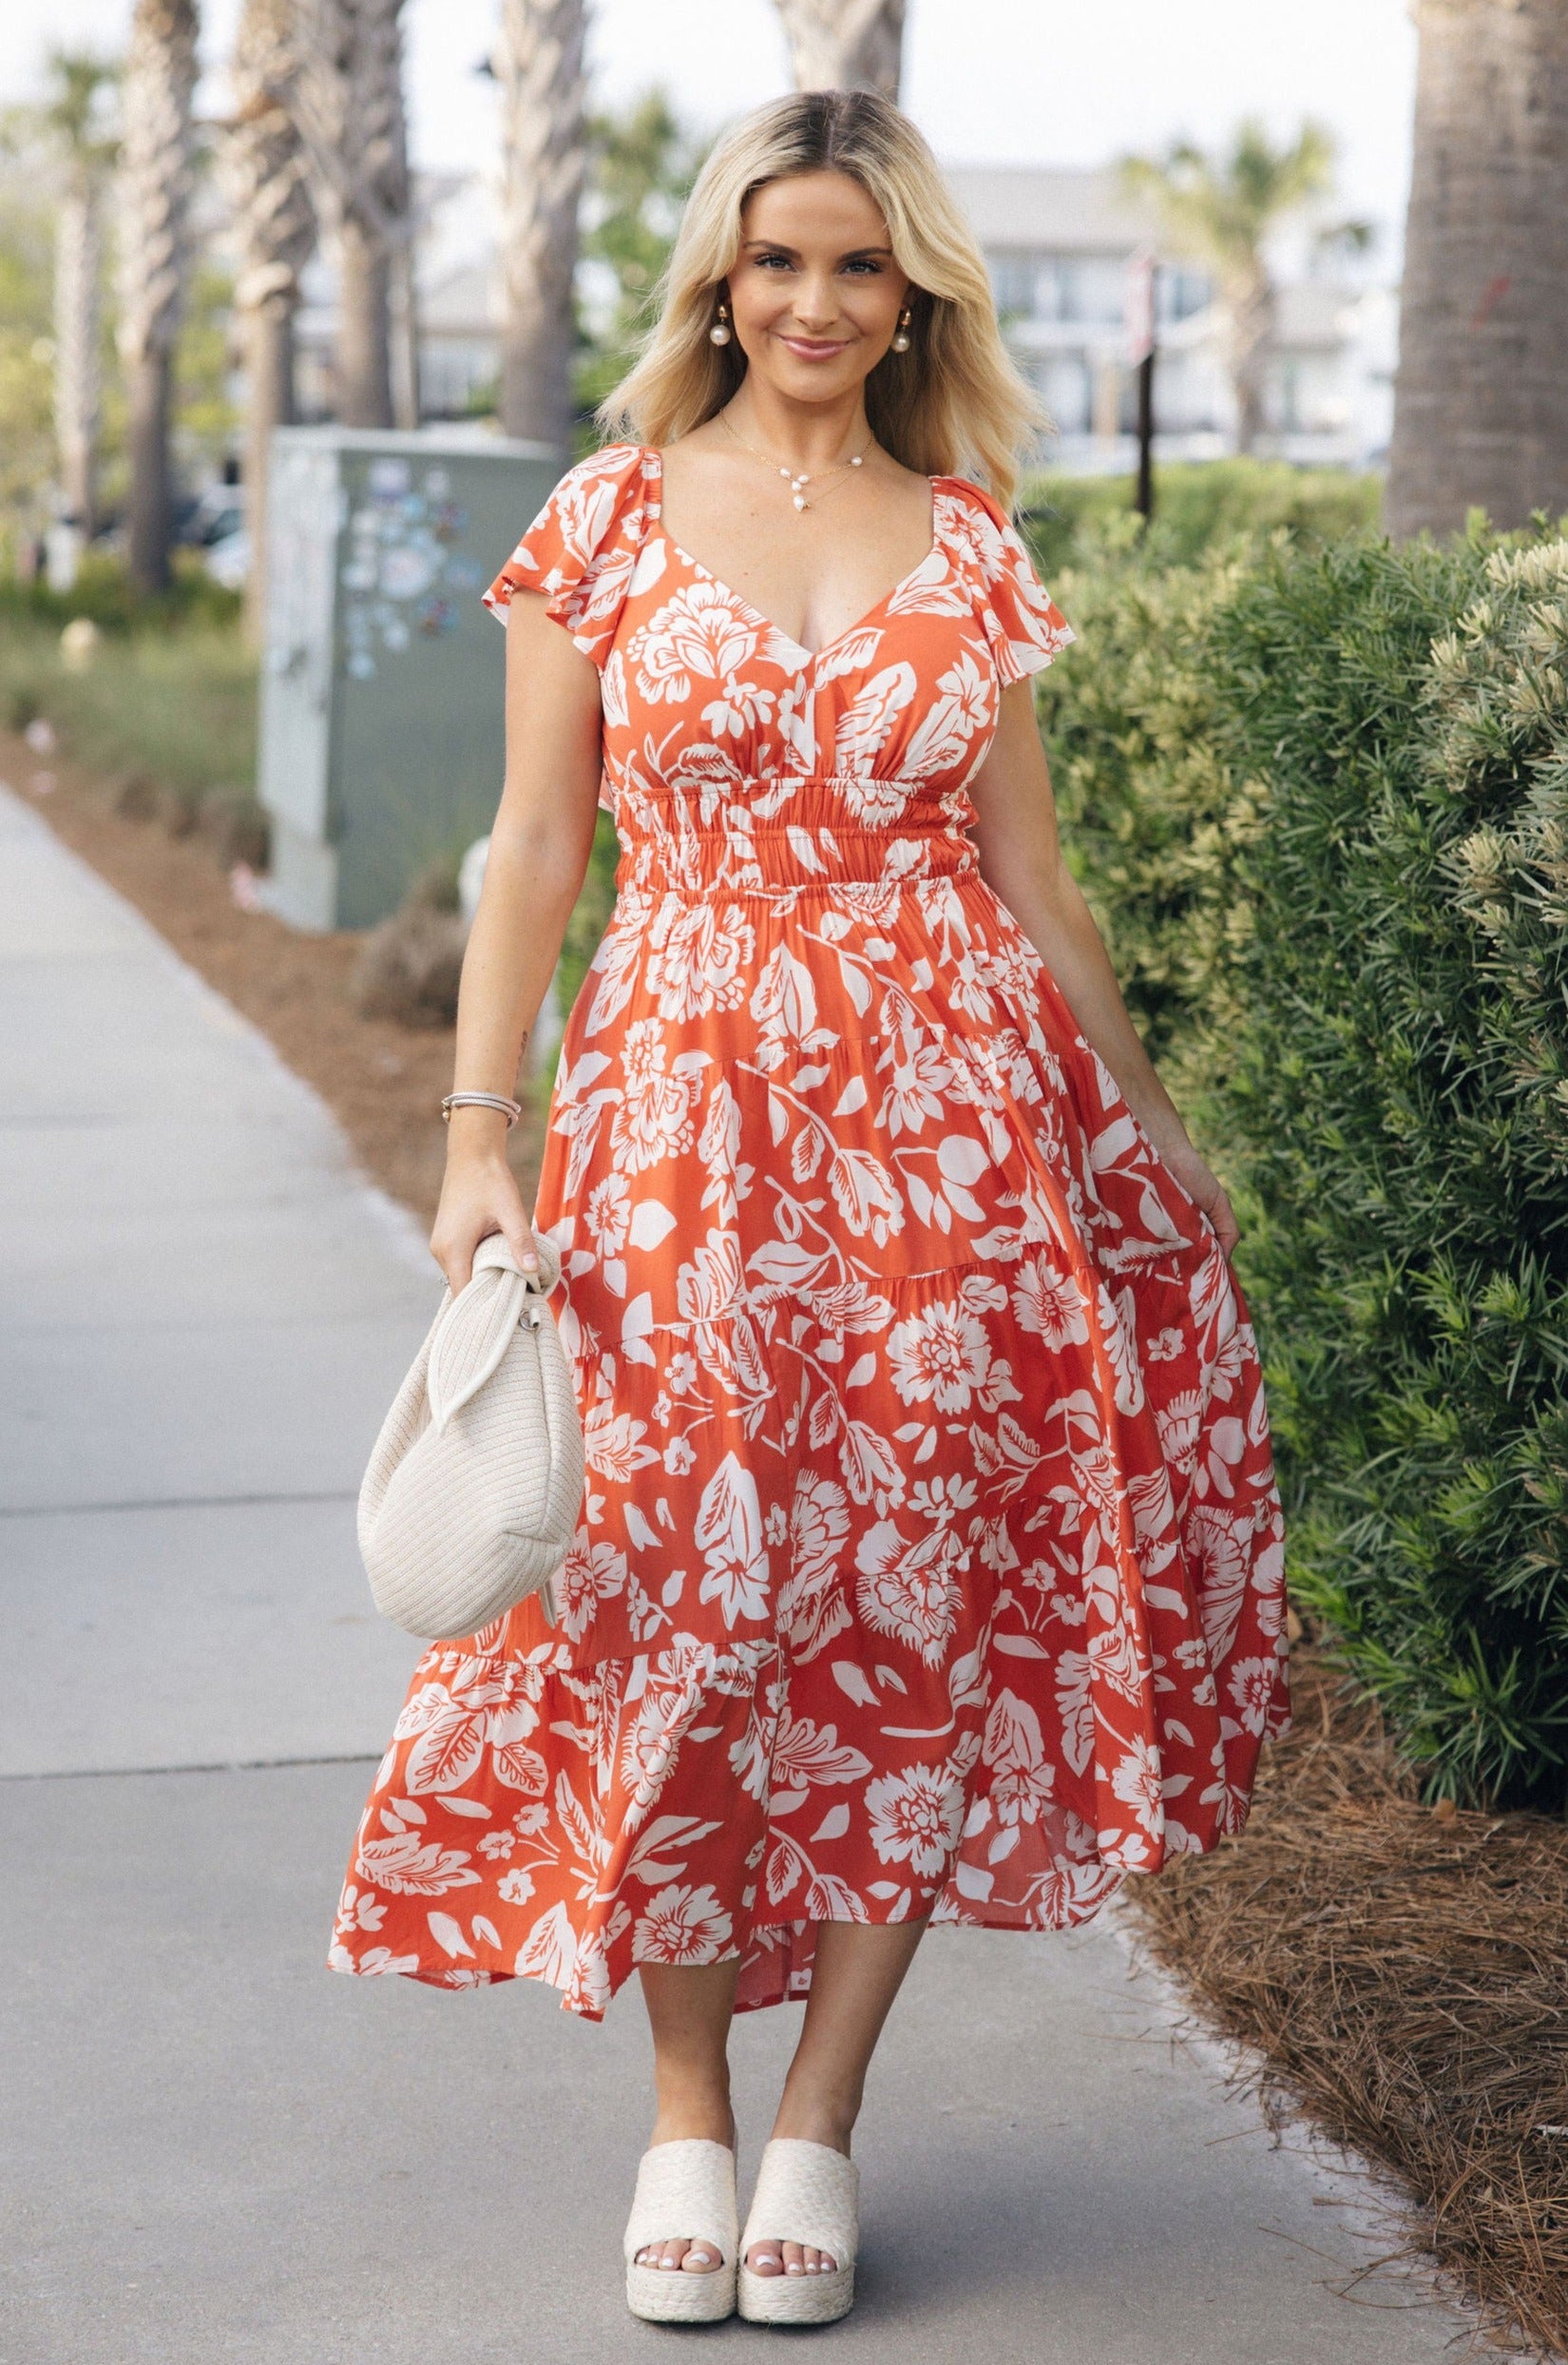 Full body view of female model wearing the Elena Orange & Cream Floral Midi Dress which features Orange and White Floral Design, Midi Length, Orange Thigh Length Lining, Tiered Body, Smocked Waistband, Sweetheart Neckline, Ruffle Straps and Open Back